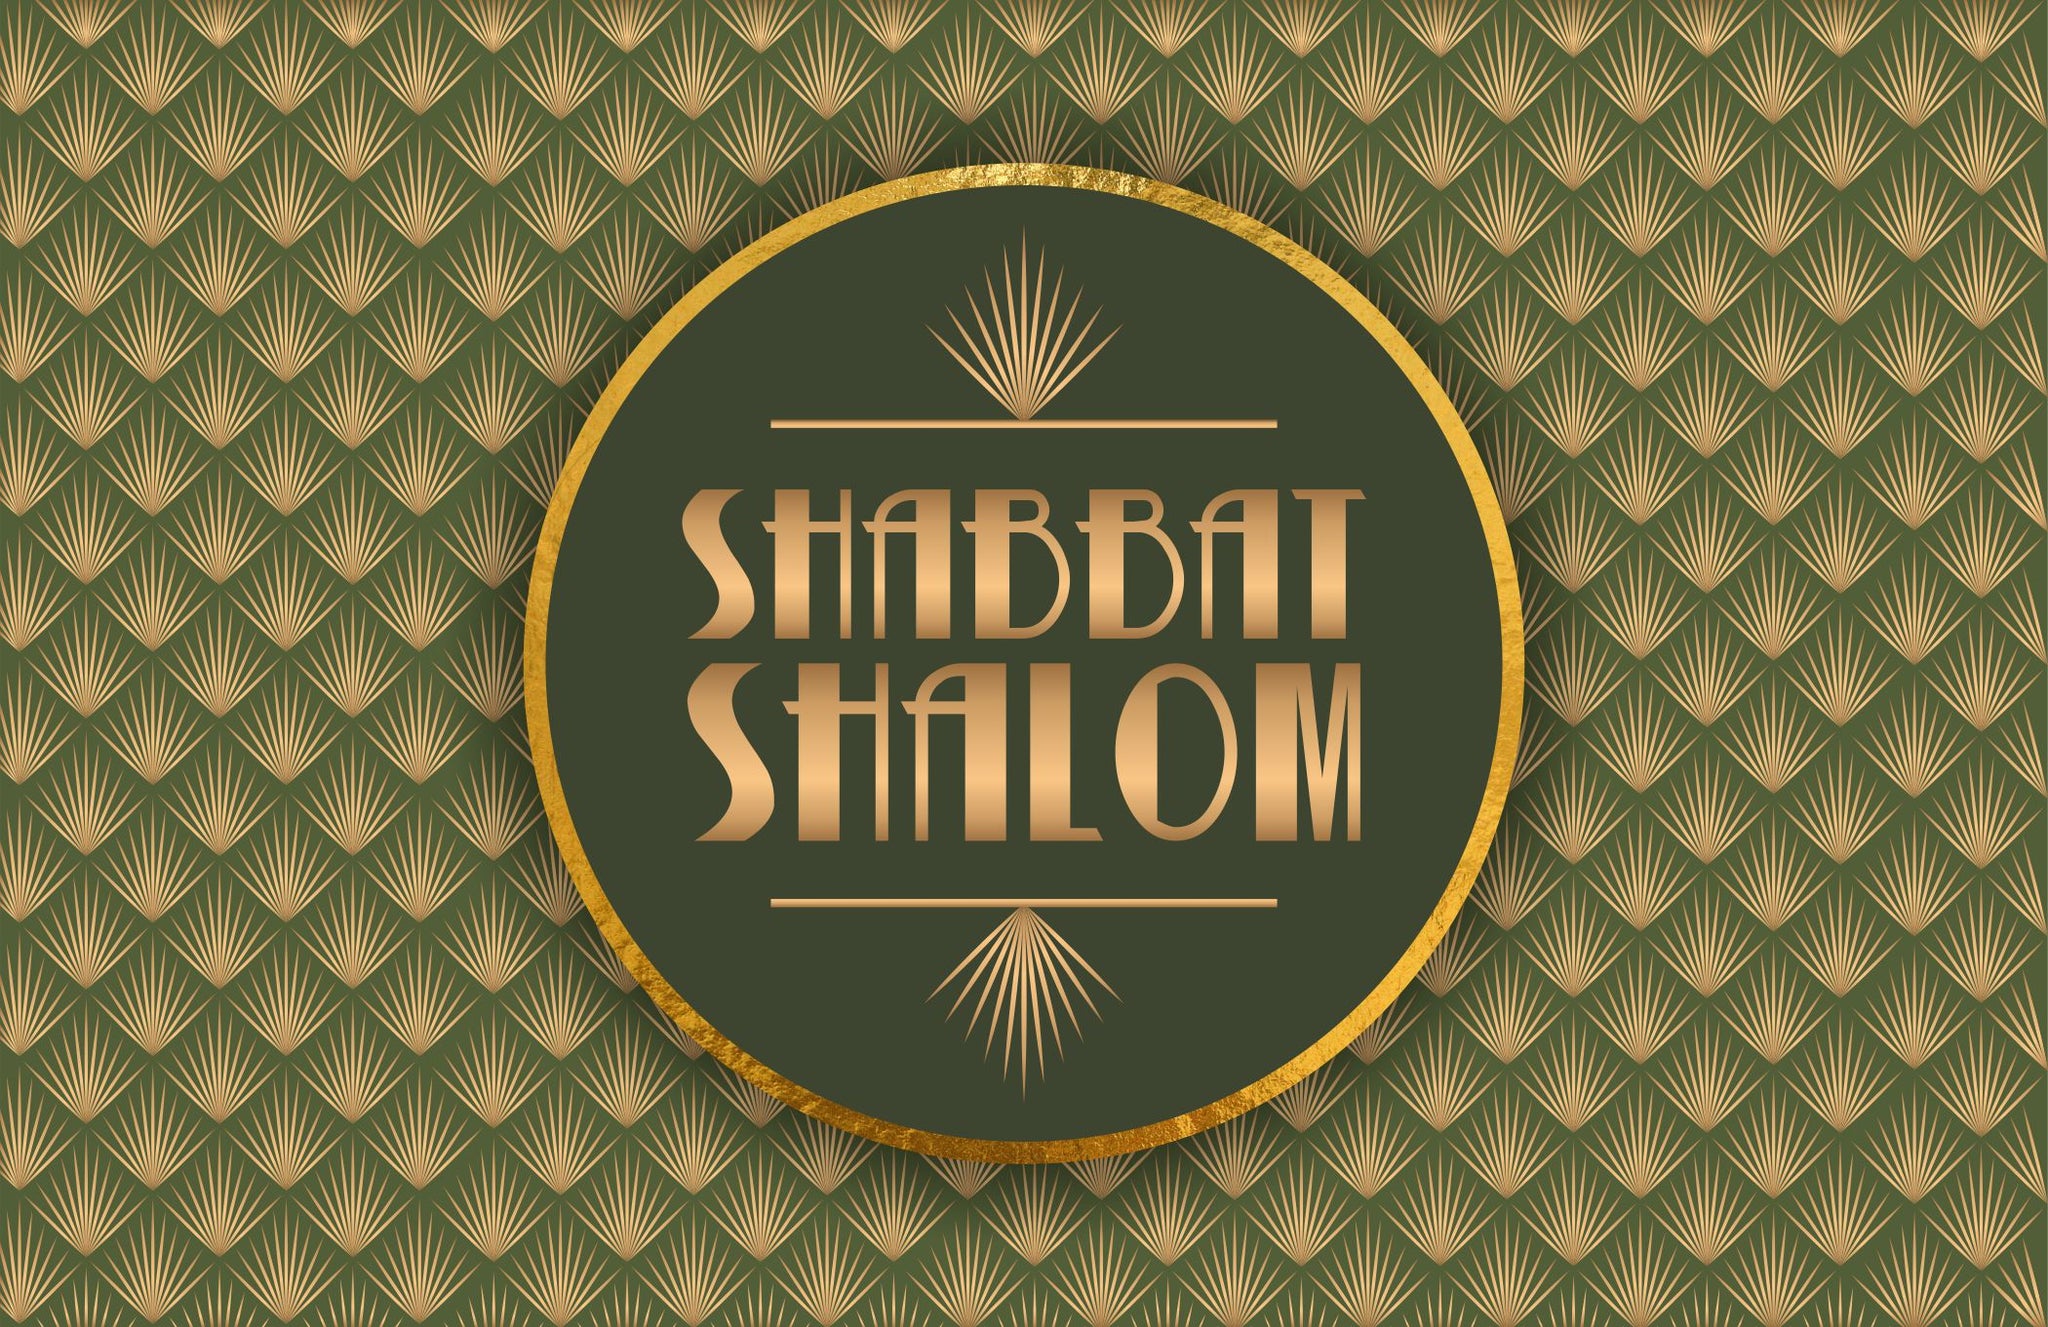 Shabbat Shalom placemat Art Nouveau style, gold and green